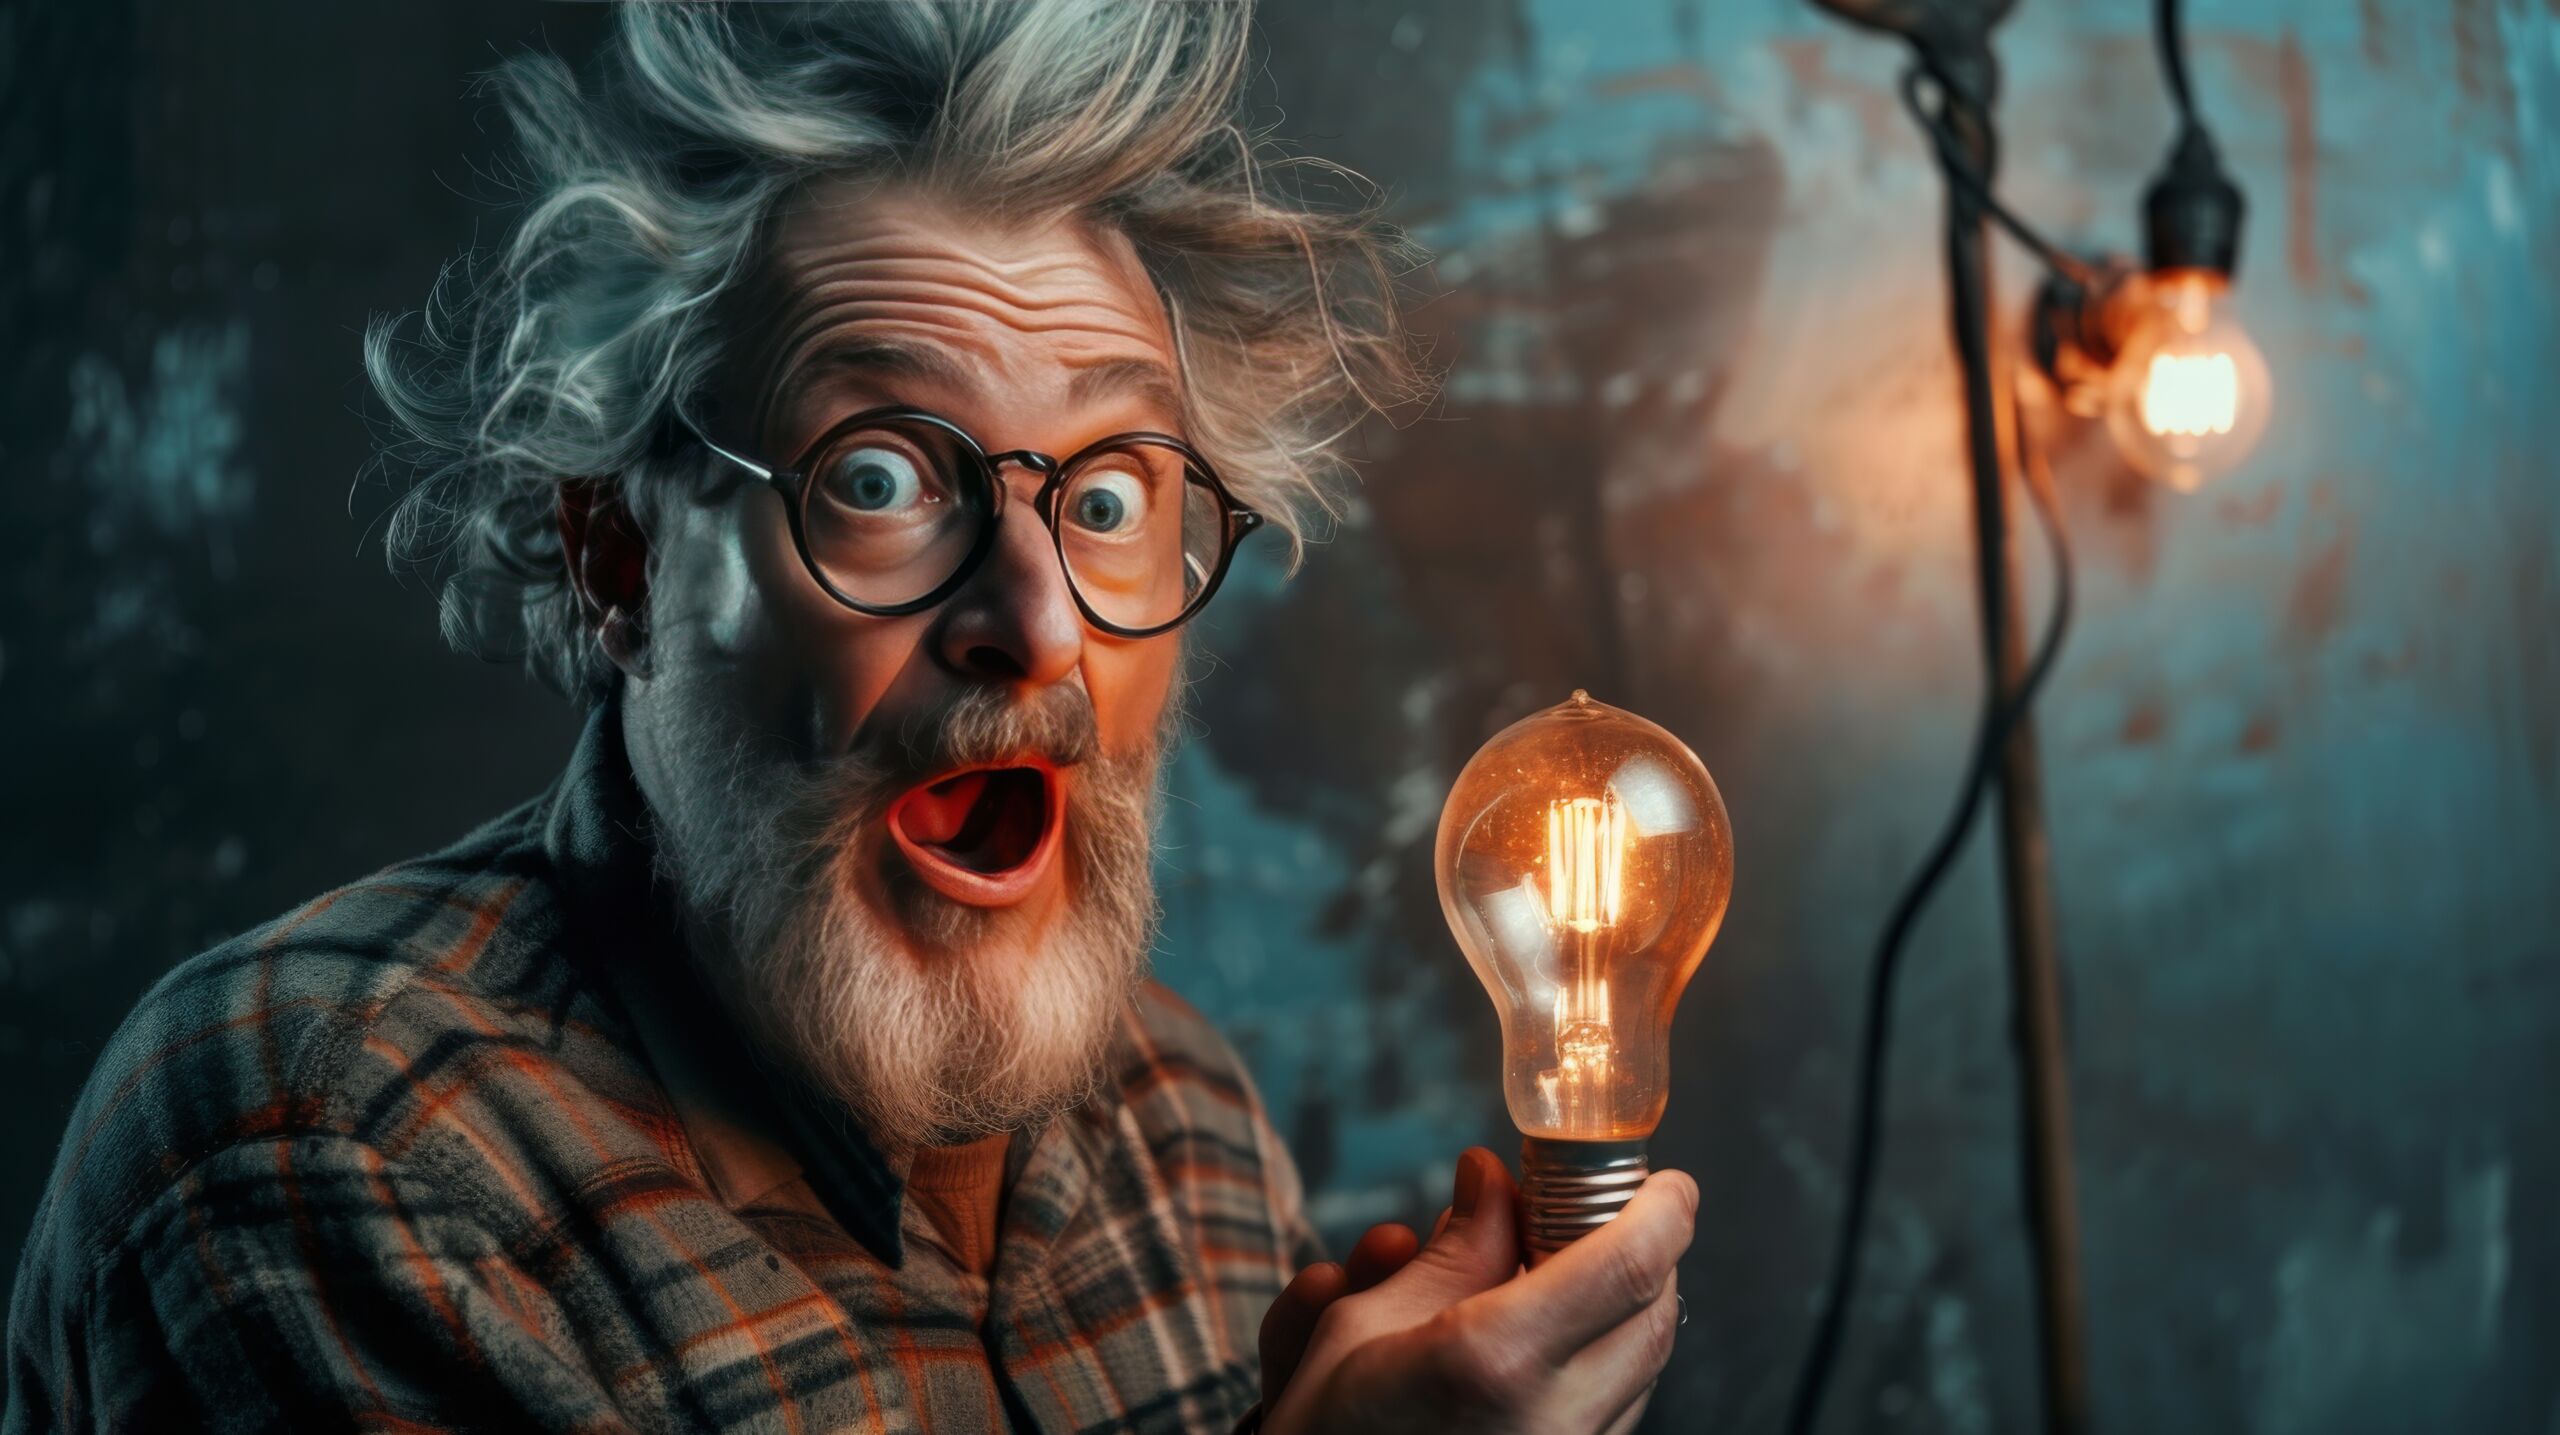 Wide-eyed scientist with wild hair holding a glowing light bulb.